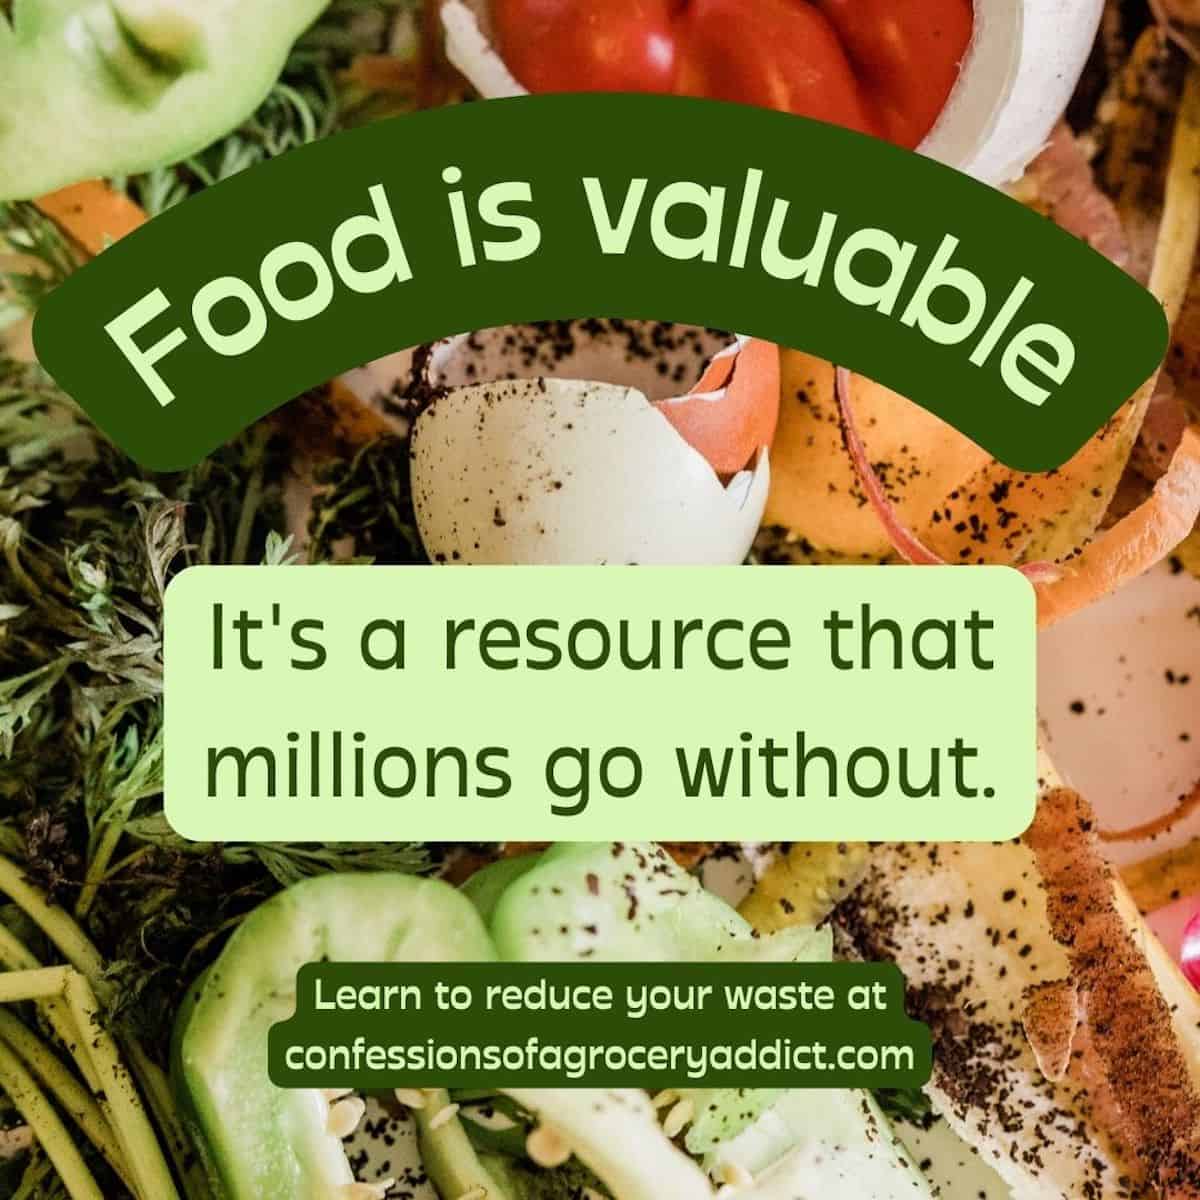 square image of food scraps with text overlay that reads "food is valuable; it's a resource that millions go without" learn to reduce your waste at confessions of a grocery addict dot com.